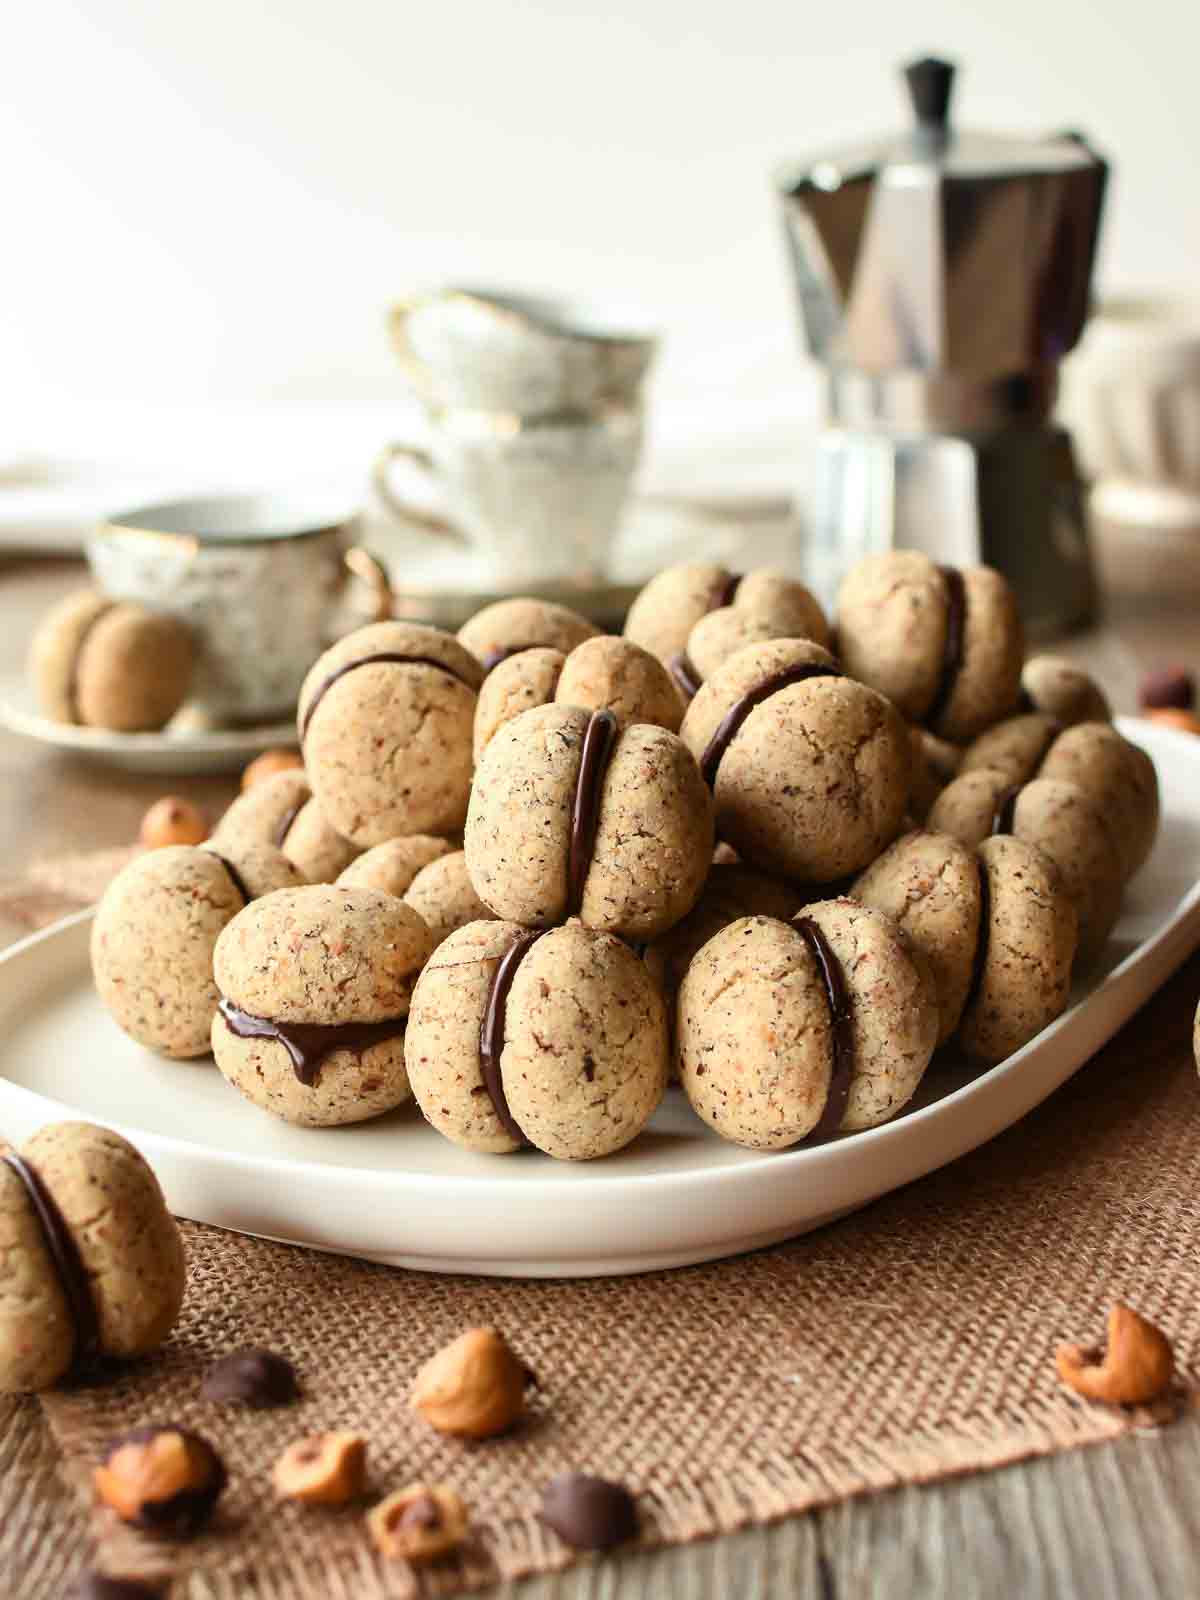 Pile of chocolate sandwiched hazelnut cookies on a white plate.